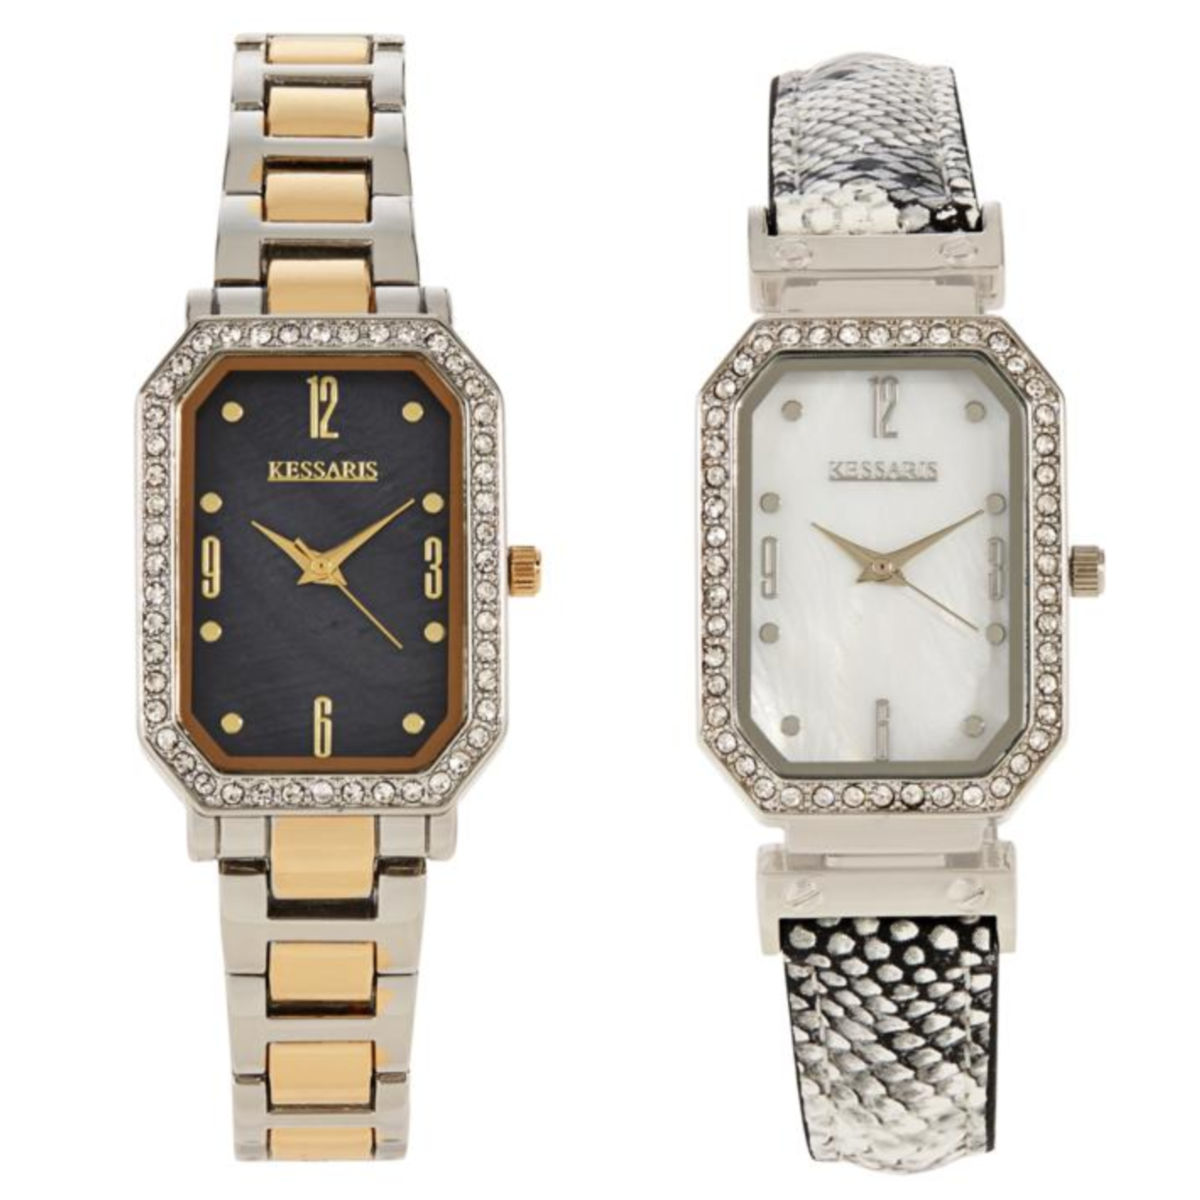 Kessaris Set of 2 Mother-of-Pearl Dial Watches